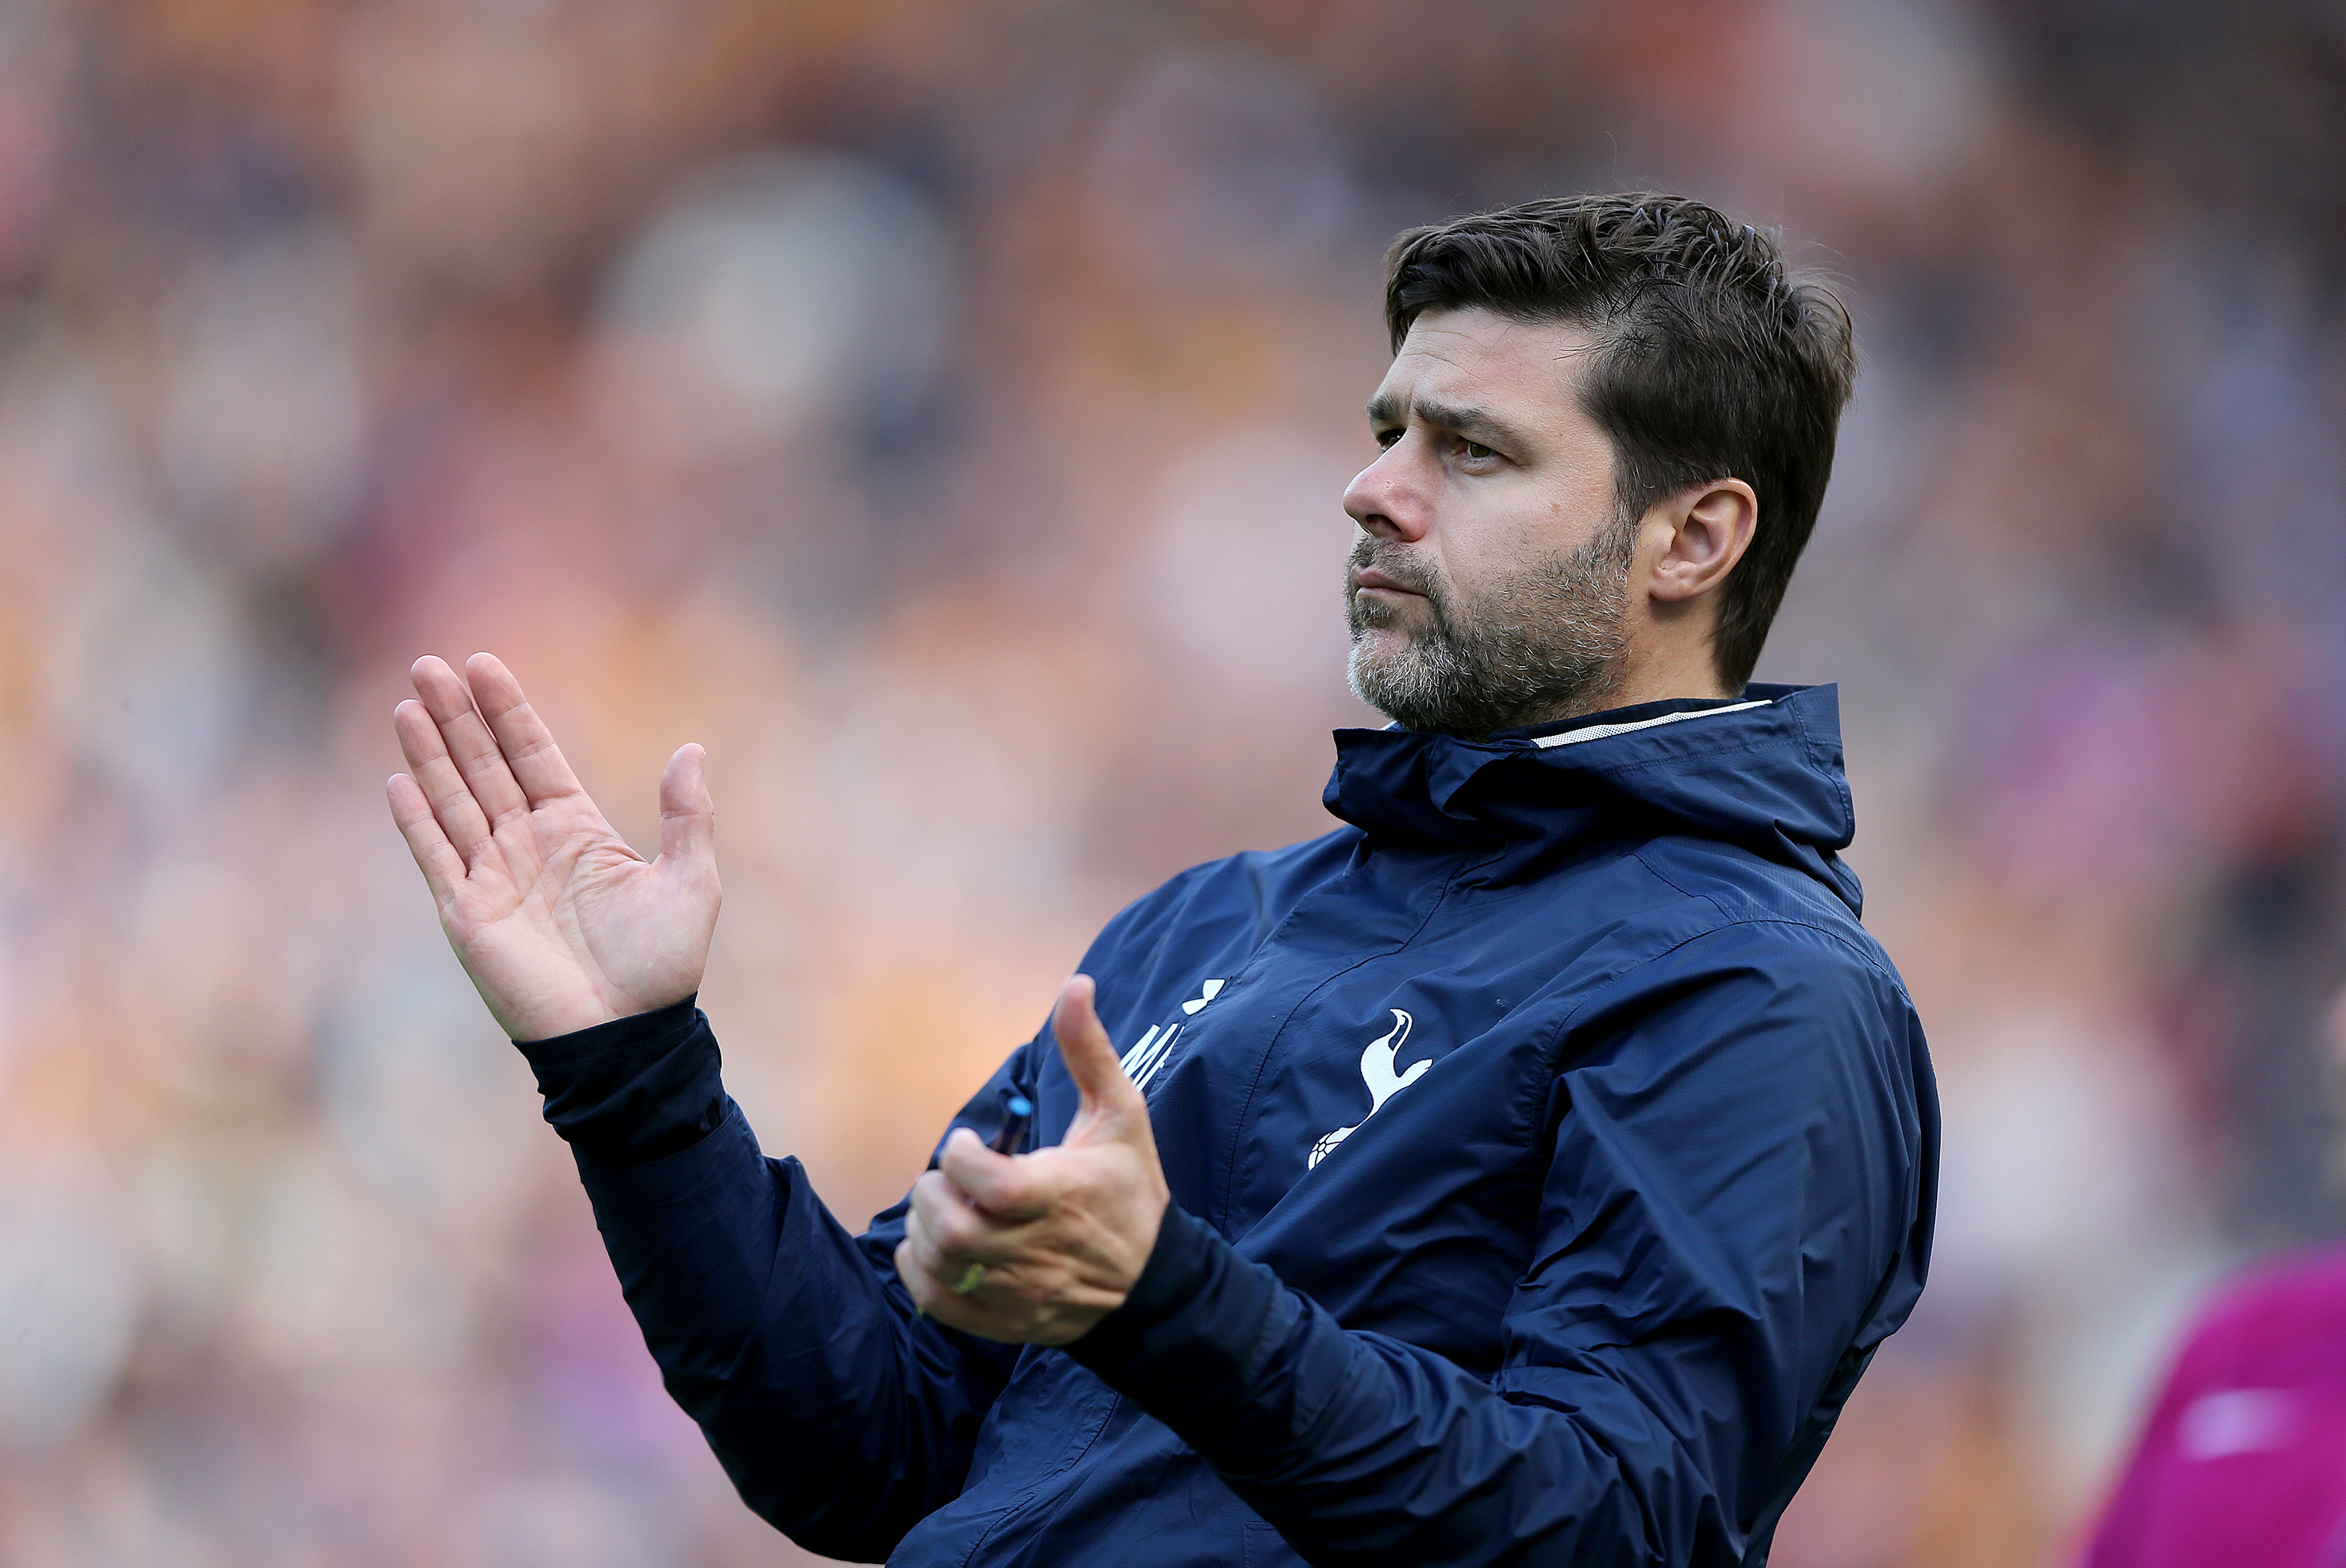 HULL, ENGLAND - MAY 21:   Mauricio Pochettino manager of Tottenham Hotspur during the Premier League match between Hull City and Tottenham Hotspur at KC Stadium on May 21, 2017 in Hull, England. (Photo by Nigel Roddis/Getty Images)